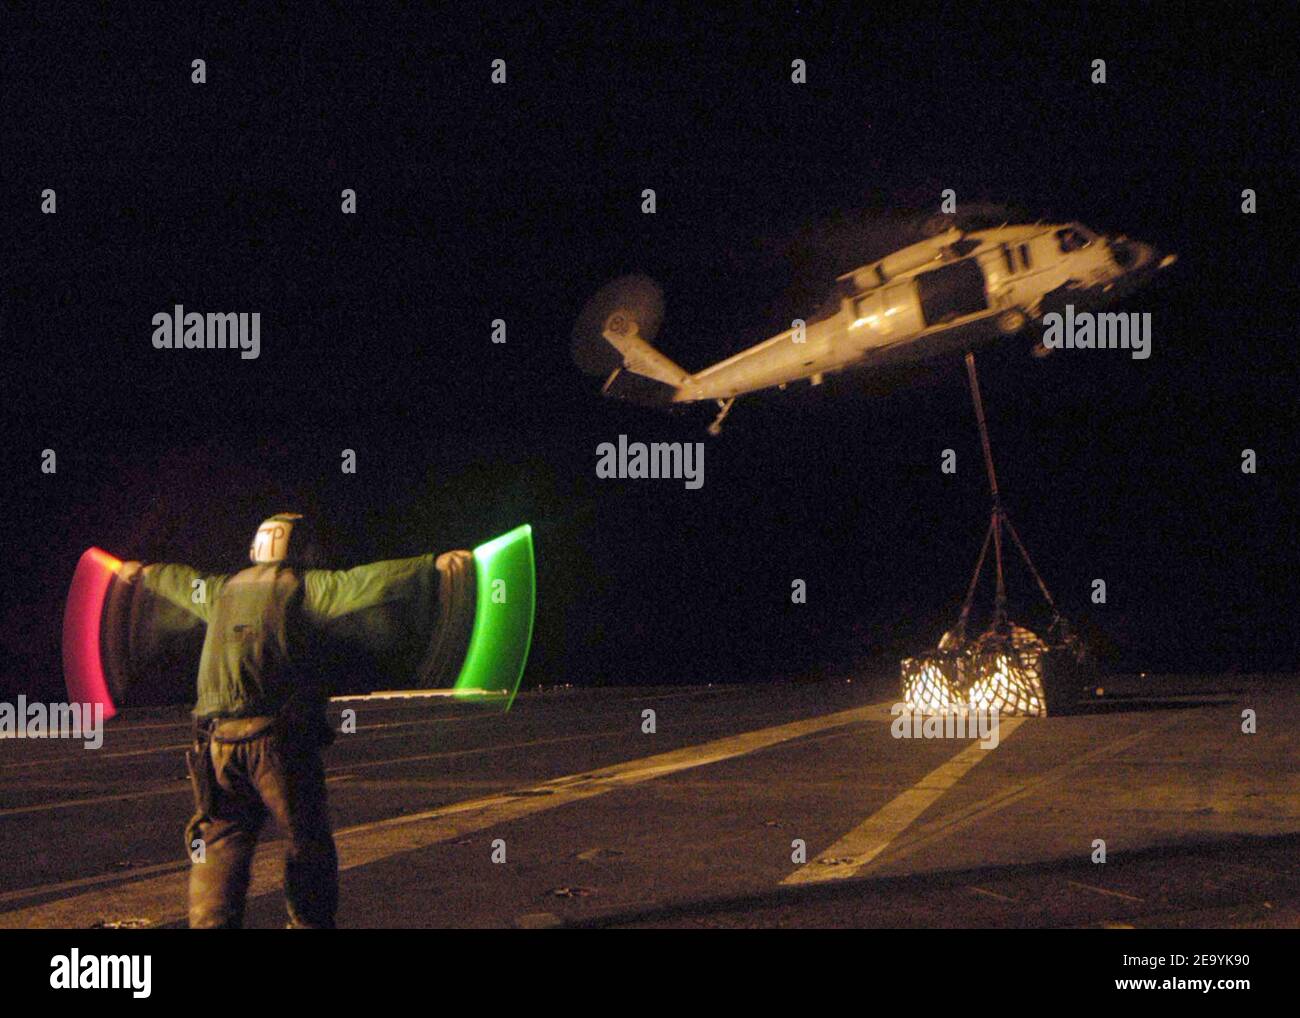 Aviation Machinist's Mate Airman Carlos Martinez of Silver Spring, Md., uses lighted wands to direct an MH-60S Knighthawk helicopter, assigned to the 'Gunbearers' of Helicopter Combat Support Squadron Eleven (HC-11), to drop a cargo net full of relief supplies on the flight deck aboard USS Abraham Lincoln (CVN 72) during a night vertical replenishment with a nearby supply ship. Helicopters assigned to Carrier Air Wing Two (CVW-2) and Sailors from Abraham Lincoln are supporting Operation Unified Assistance, the humanitarian operation effort in the wake of the Tsunami that struck South East Asia Stock Photo